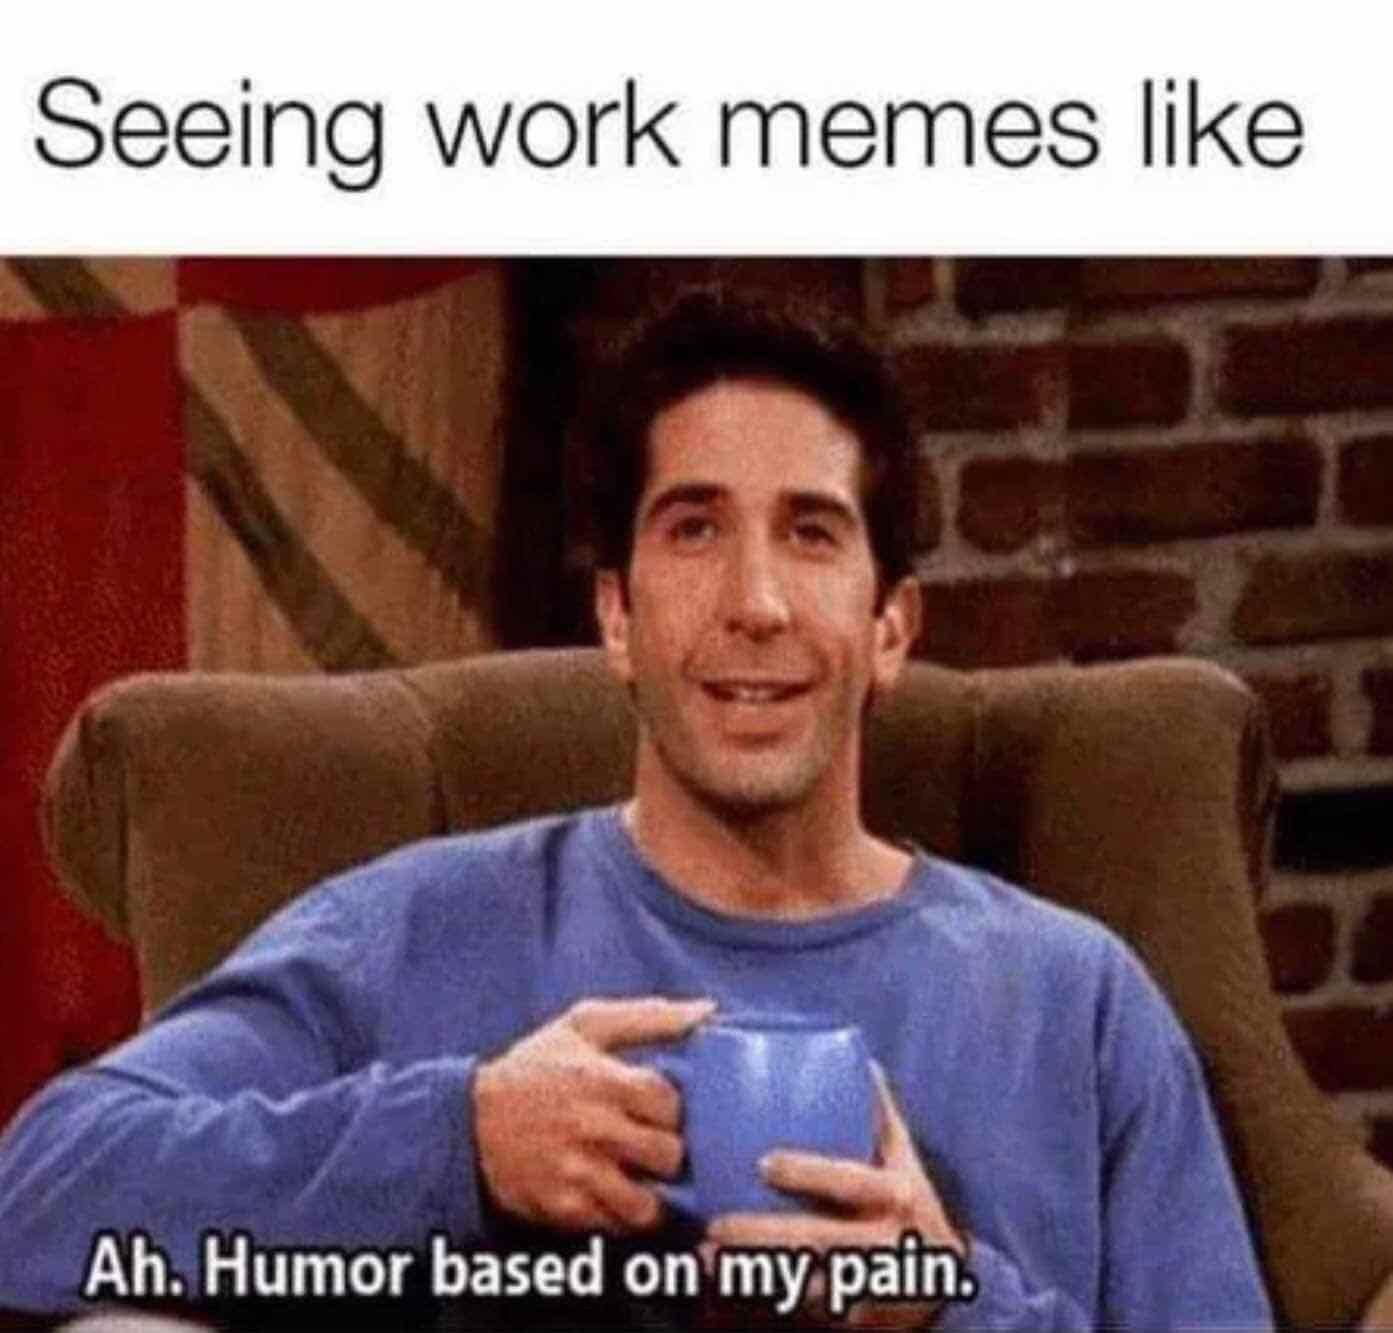 work memes about your boss - funny memes - Seeing work memes Ah. Humor based on my pain.